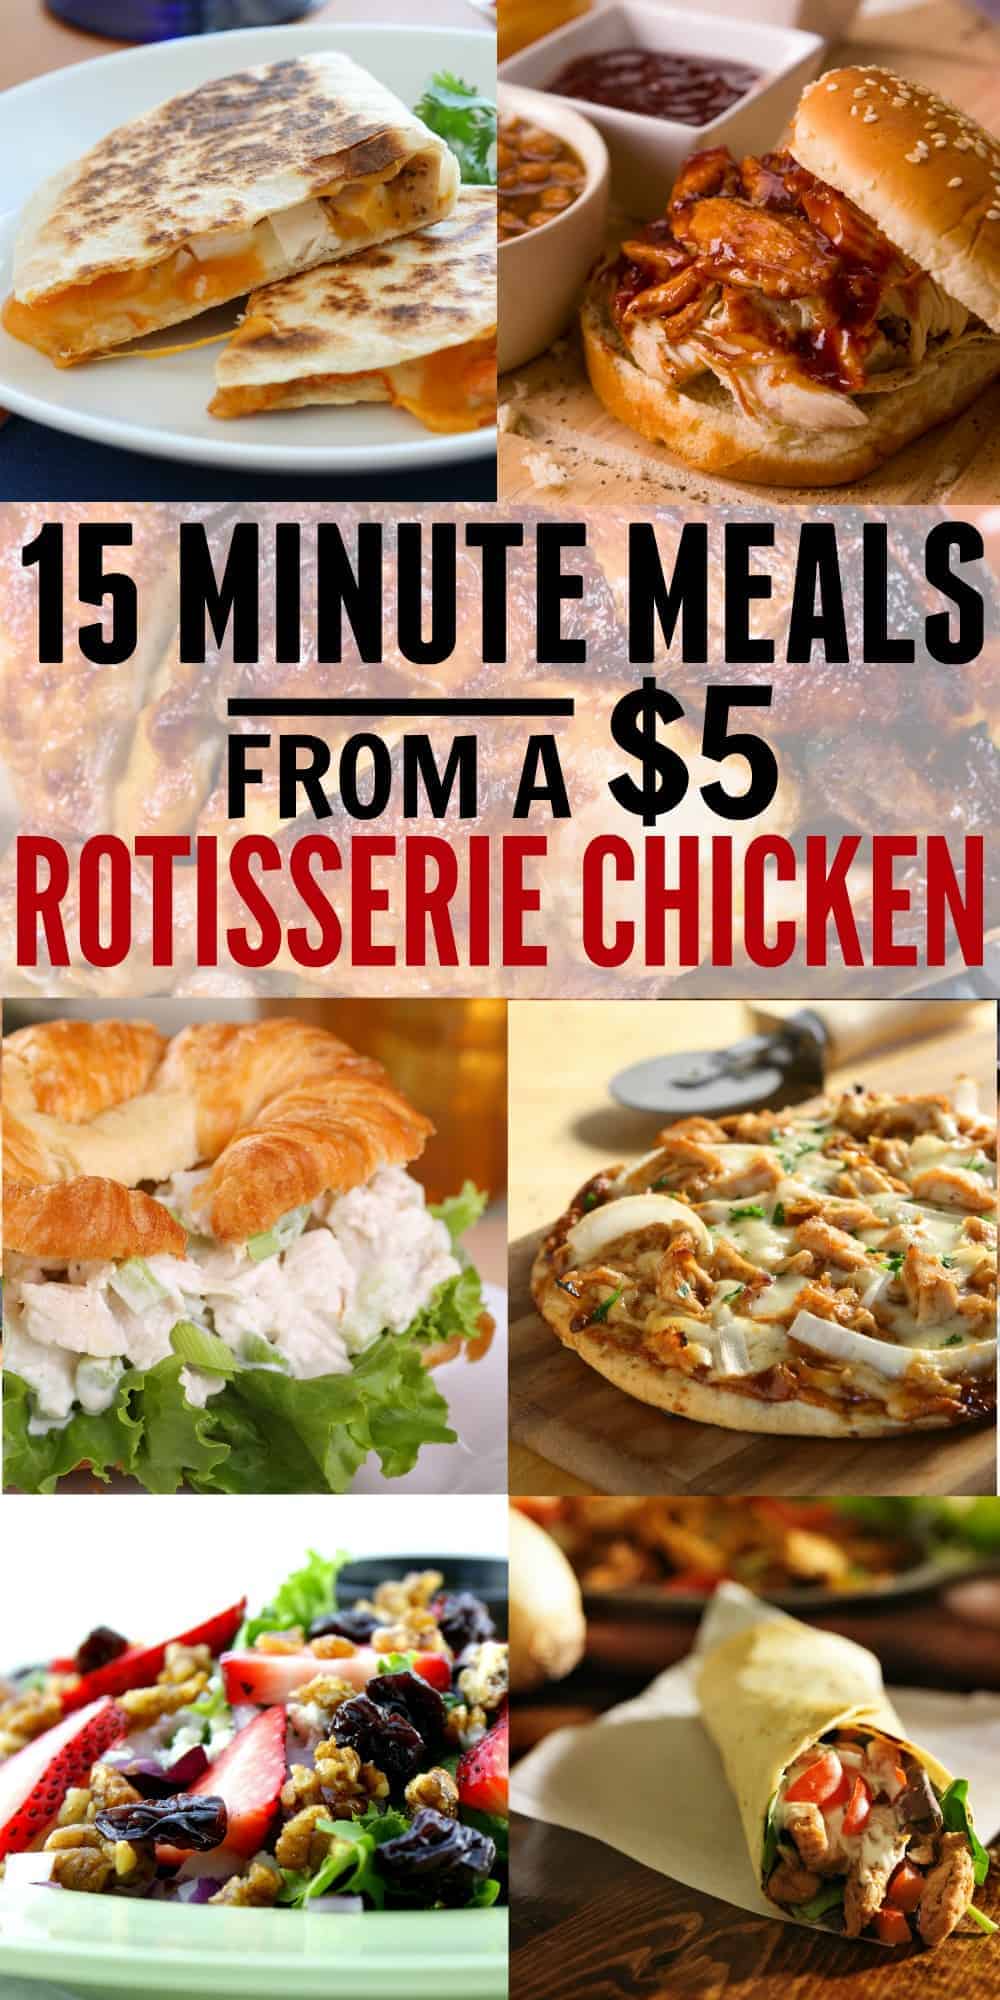 15 Minute Meals from Rotisserie Chicken. BEST LIST EVER. We've had 3 of these this week with one chicken!!! PLUS, we got the rotisserie chicken for $2.49 at Walmart with the half priced trick she gave! My husband's freaking out excited! I work late and we have two kids in sports and these are super quick easy meals that require little to no cooking. We're doing this every time I'm tempted to get delivery from now on. 